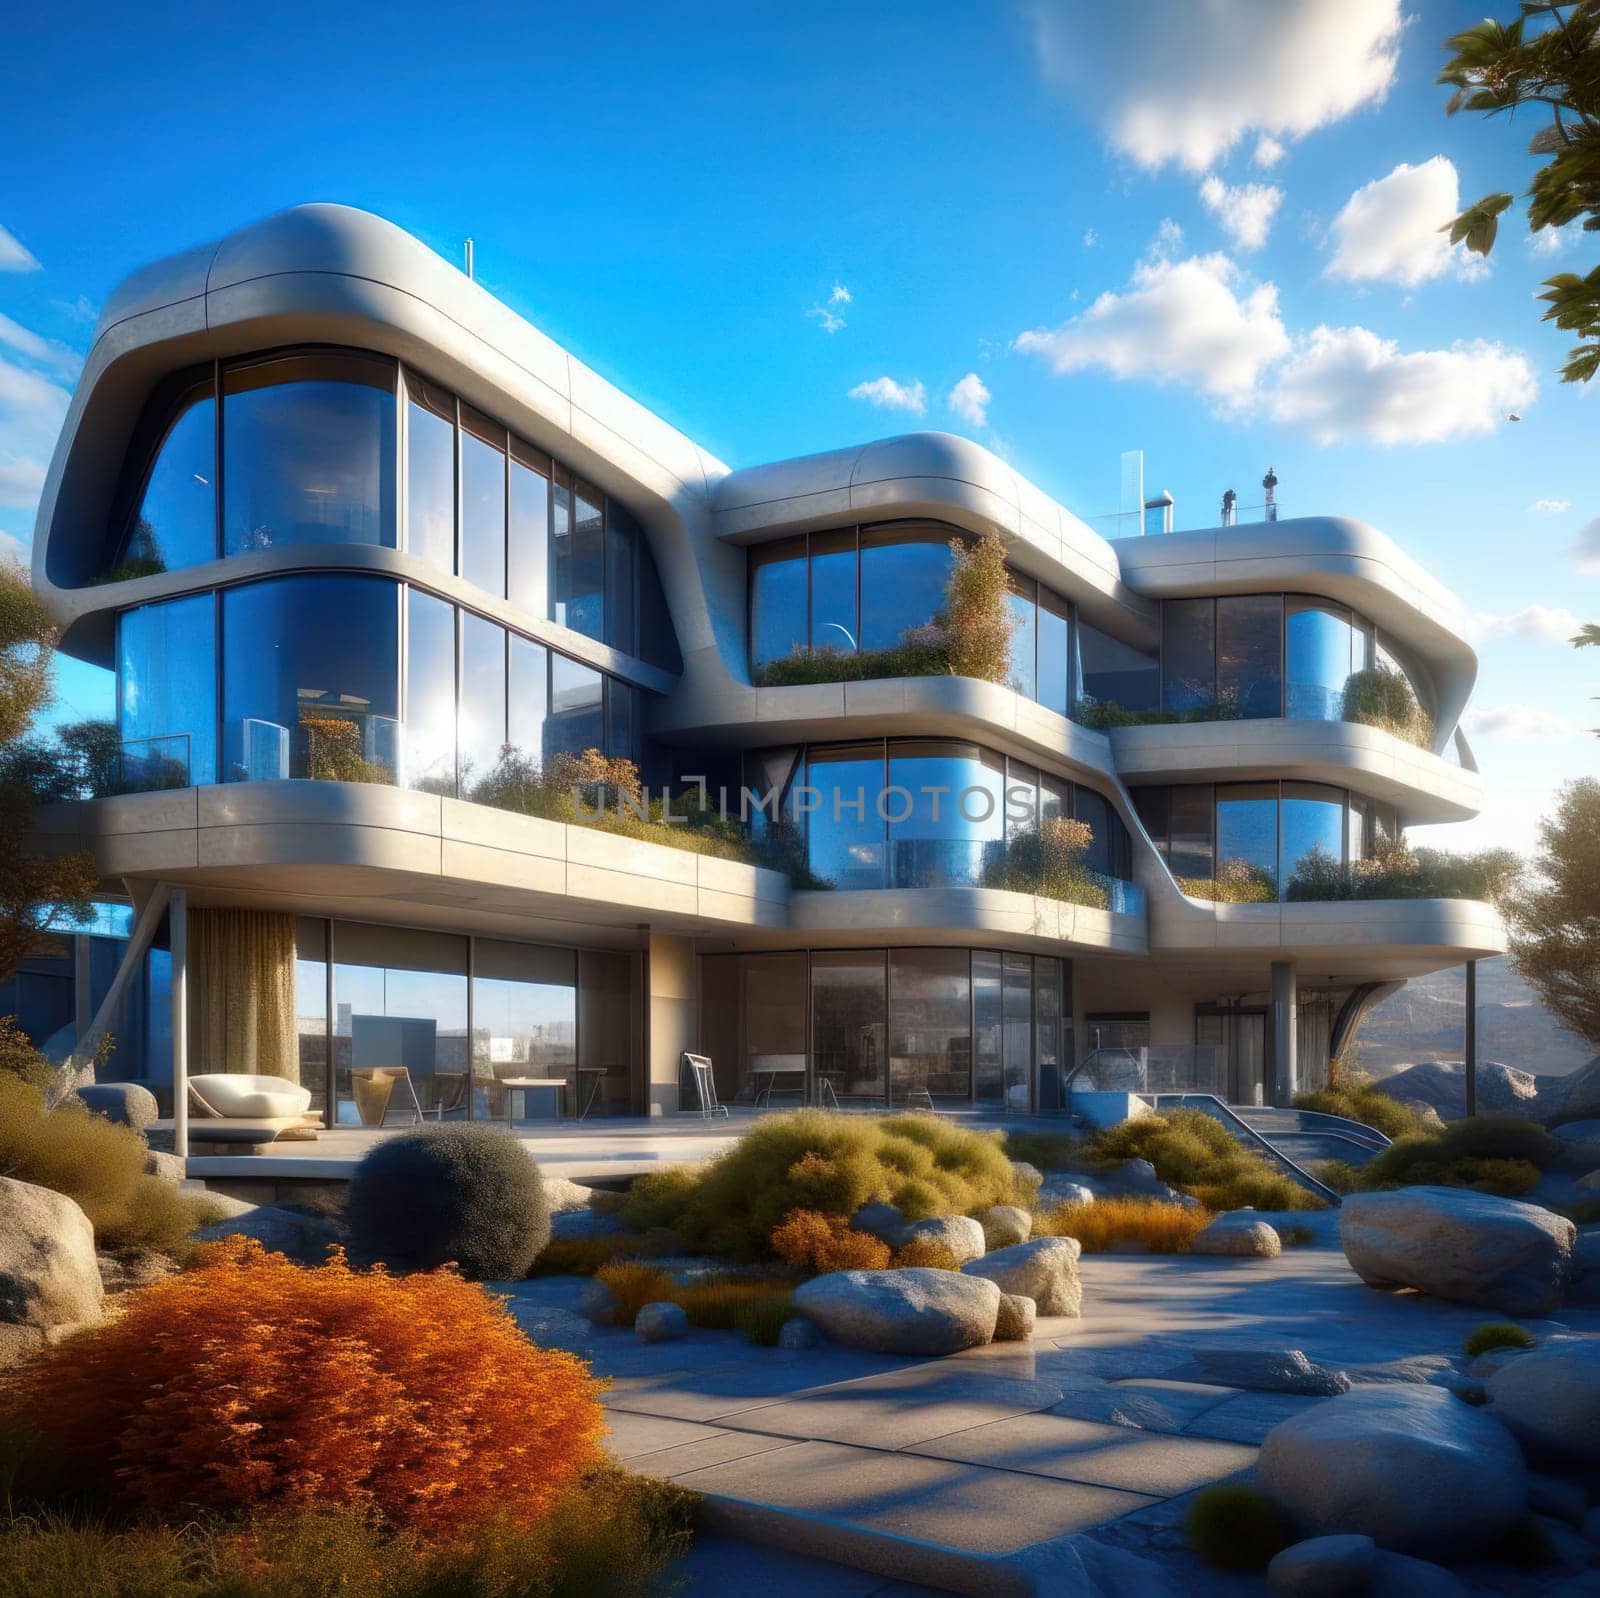 The House of the Future. Image created by AI